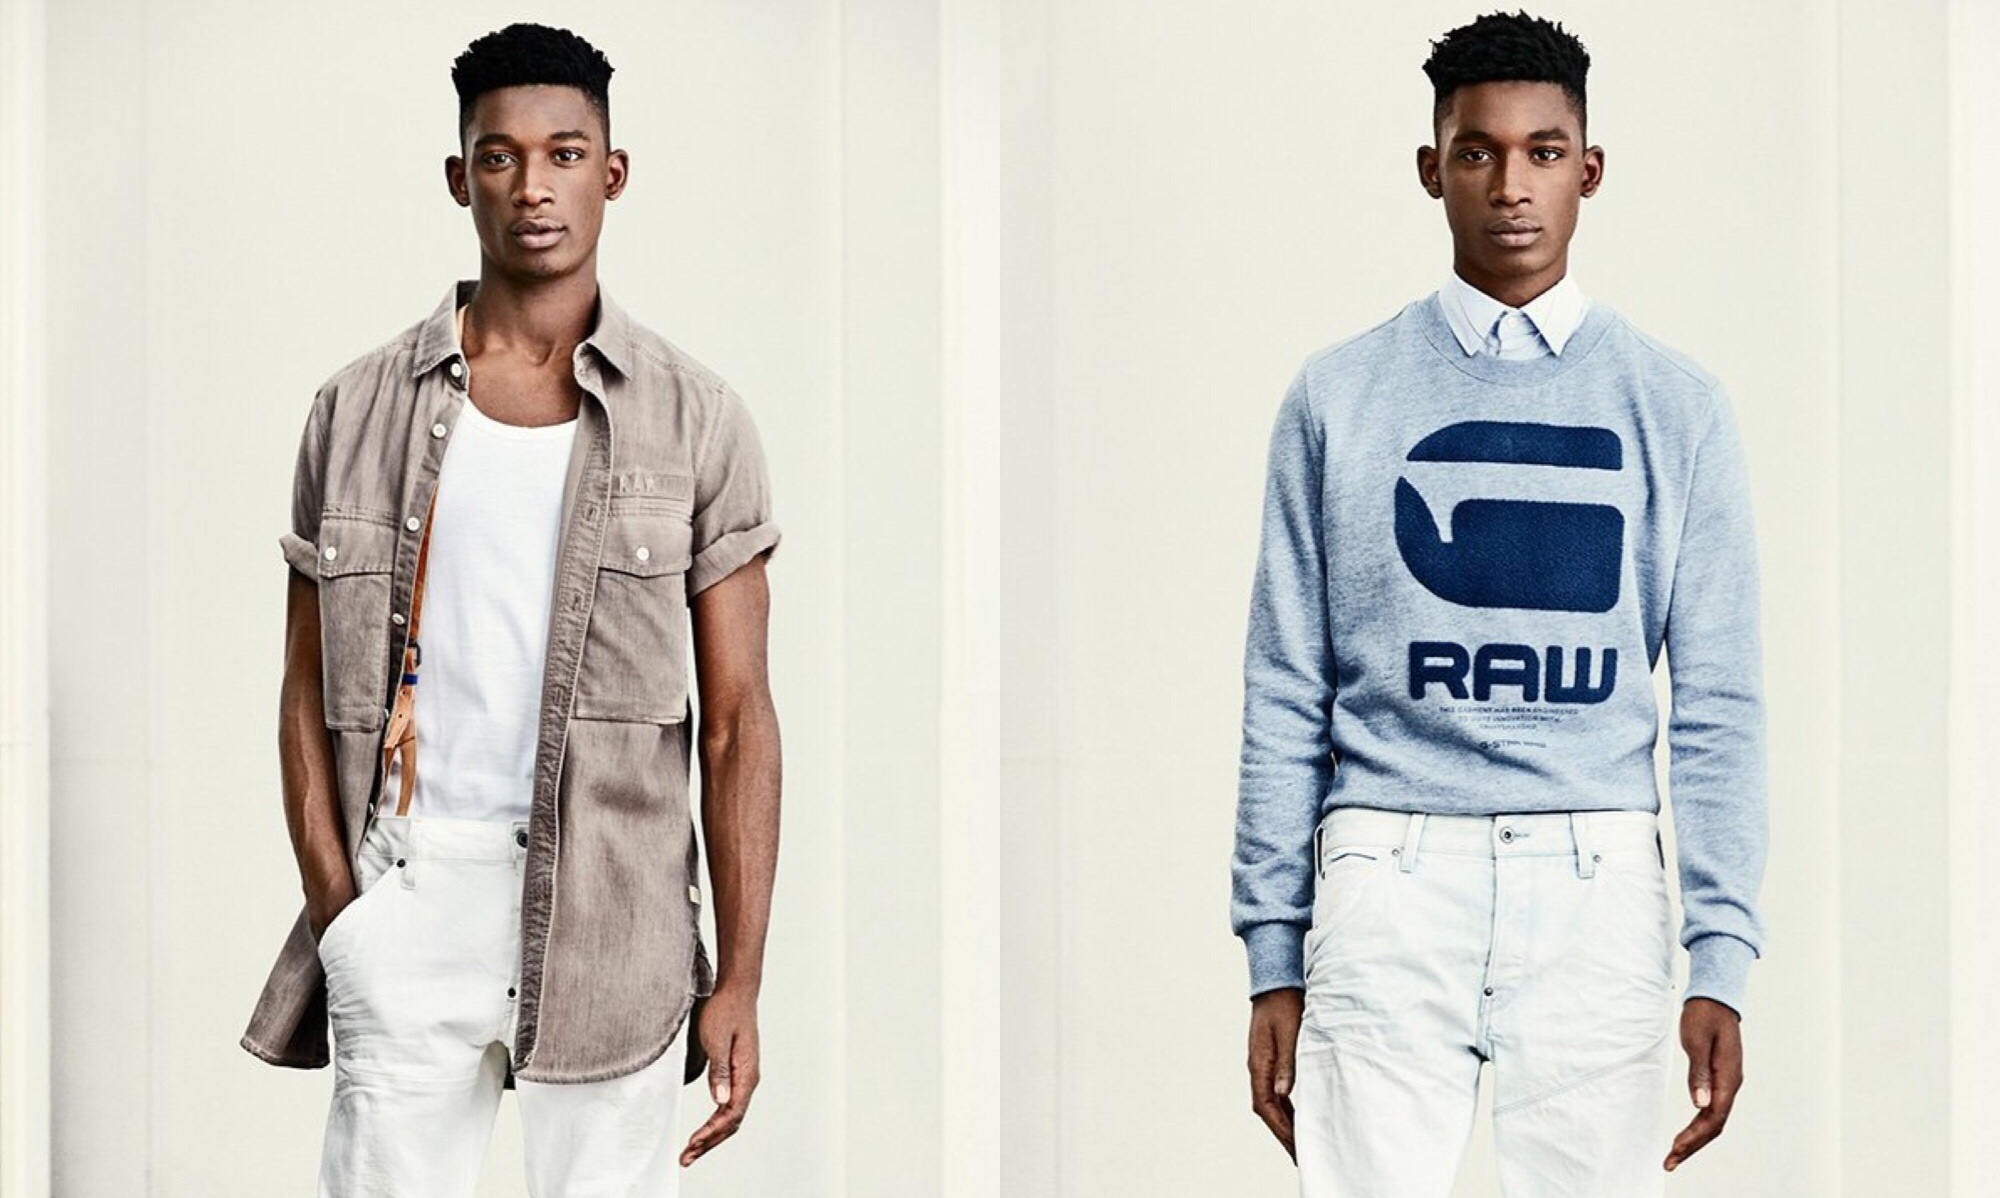 G-STAR Presents “RAW Essential” Spring/Summer 2016 collection